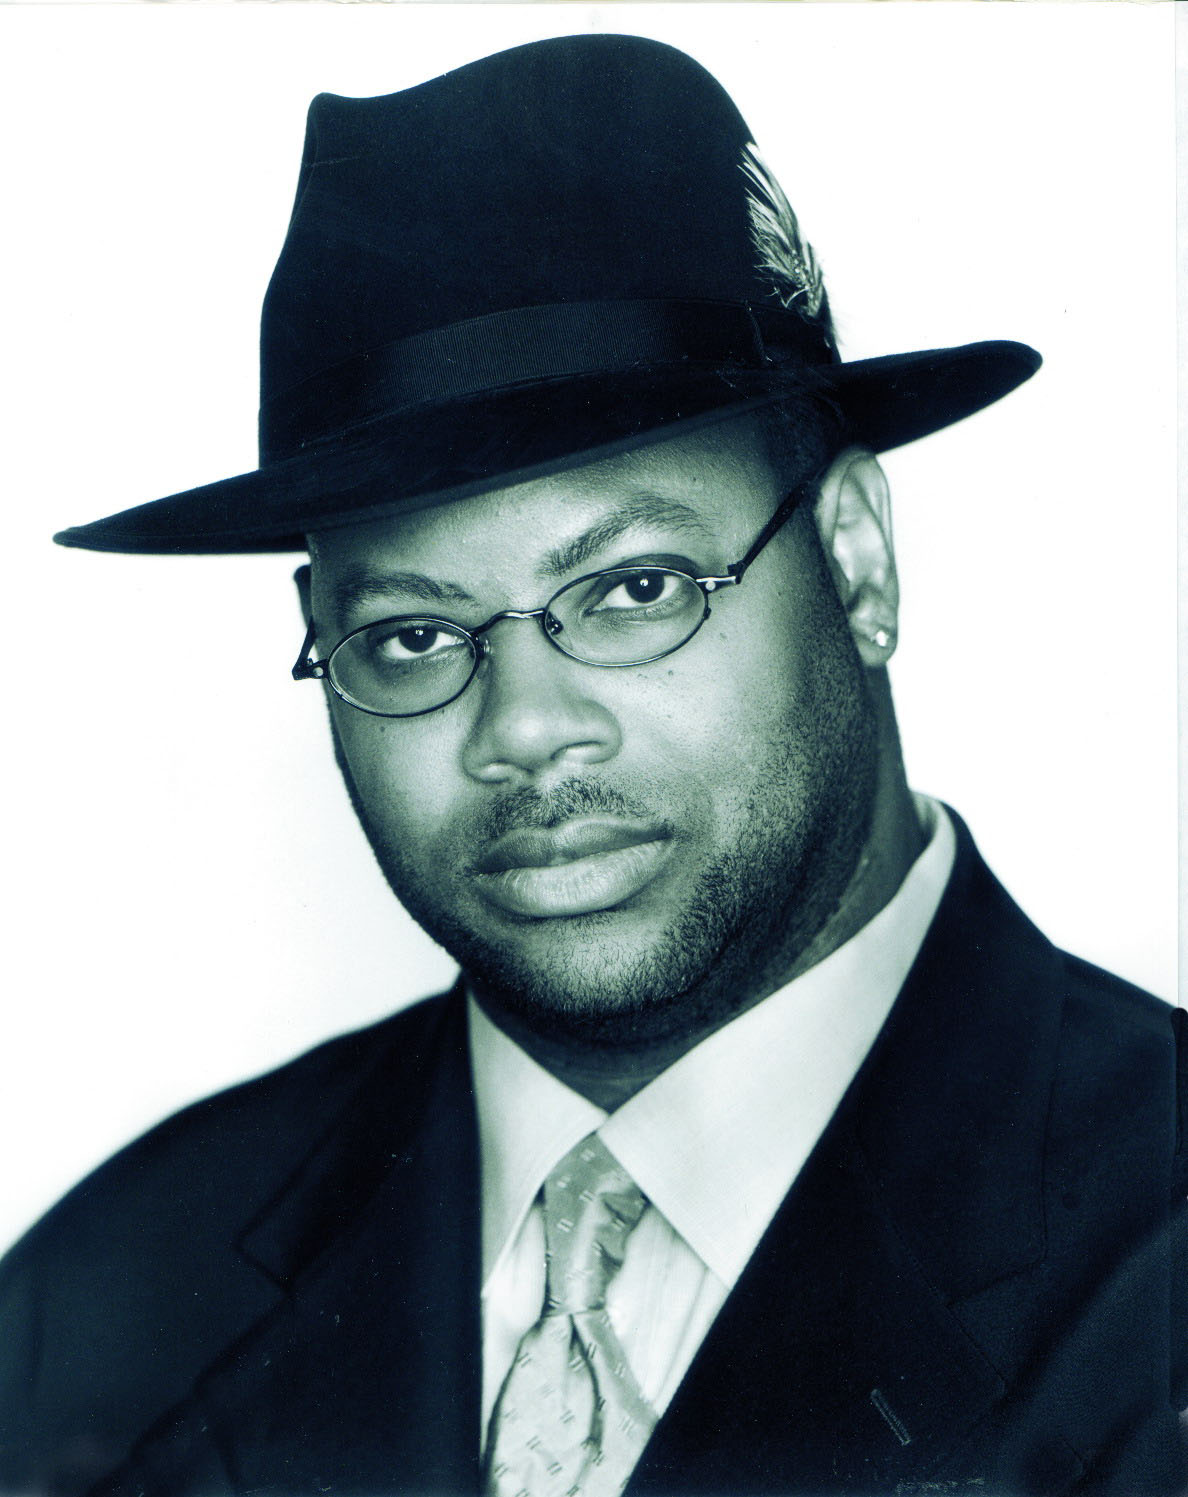 Jimmy Jam to Present Friday Keynote at Upcoming 135th AES Convention - JimmyJam